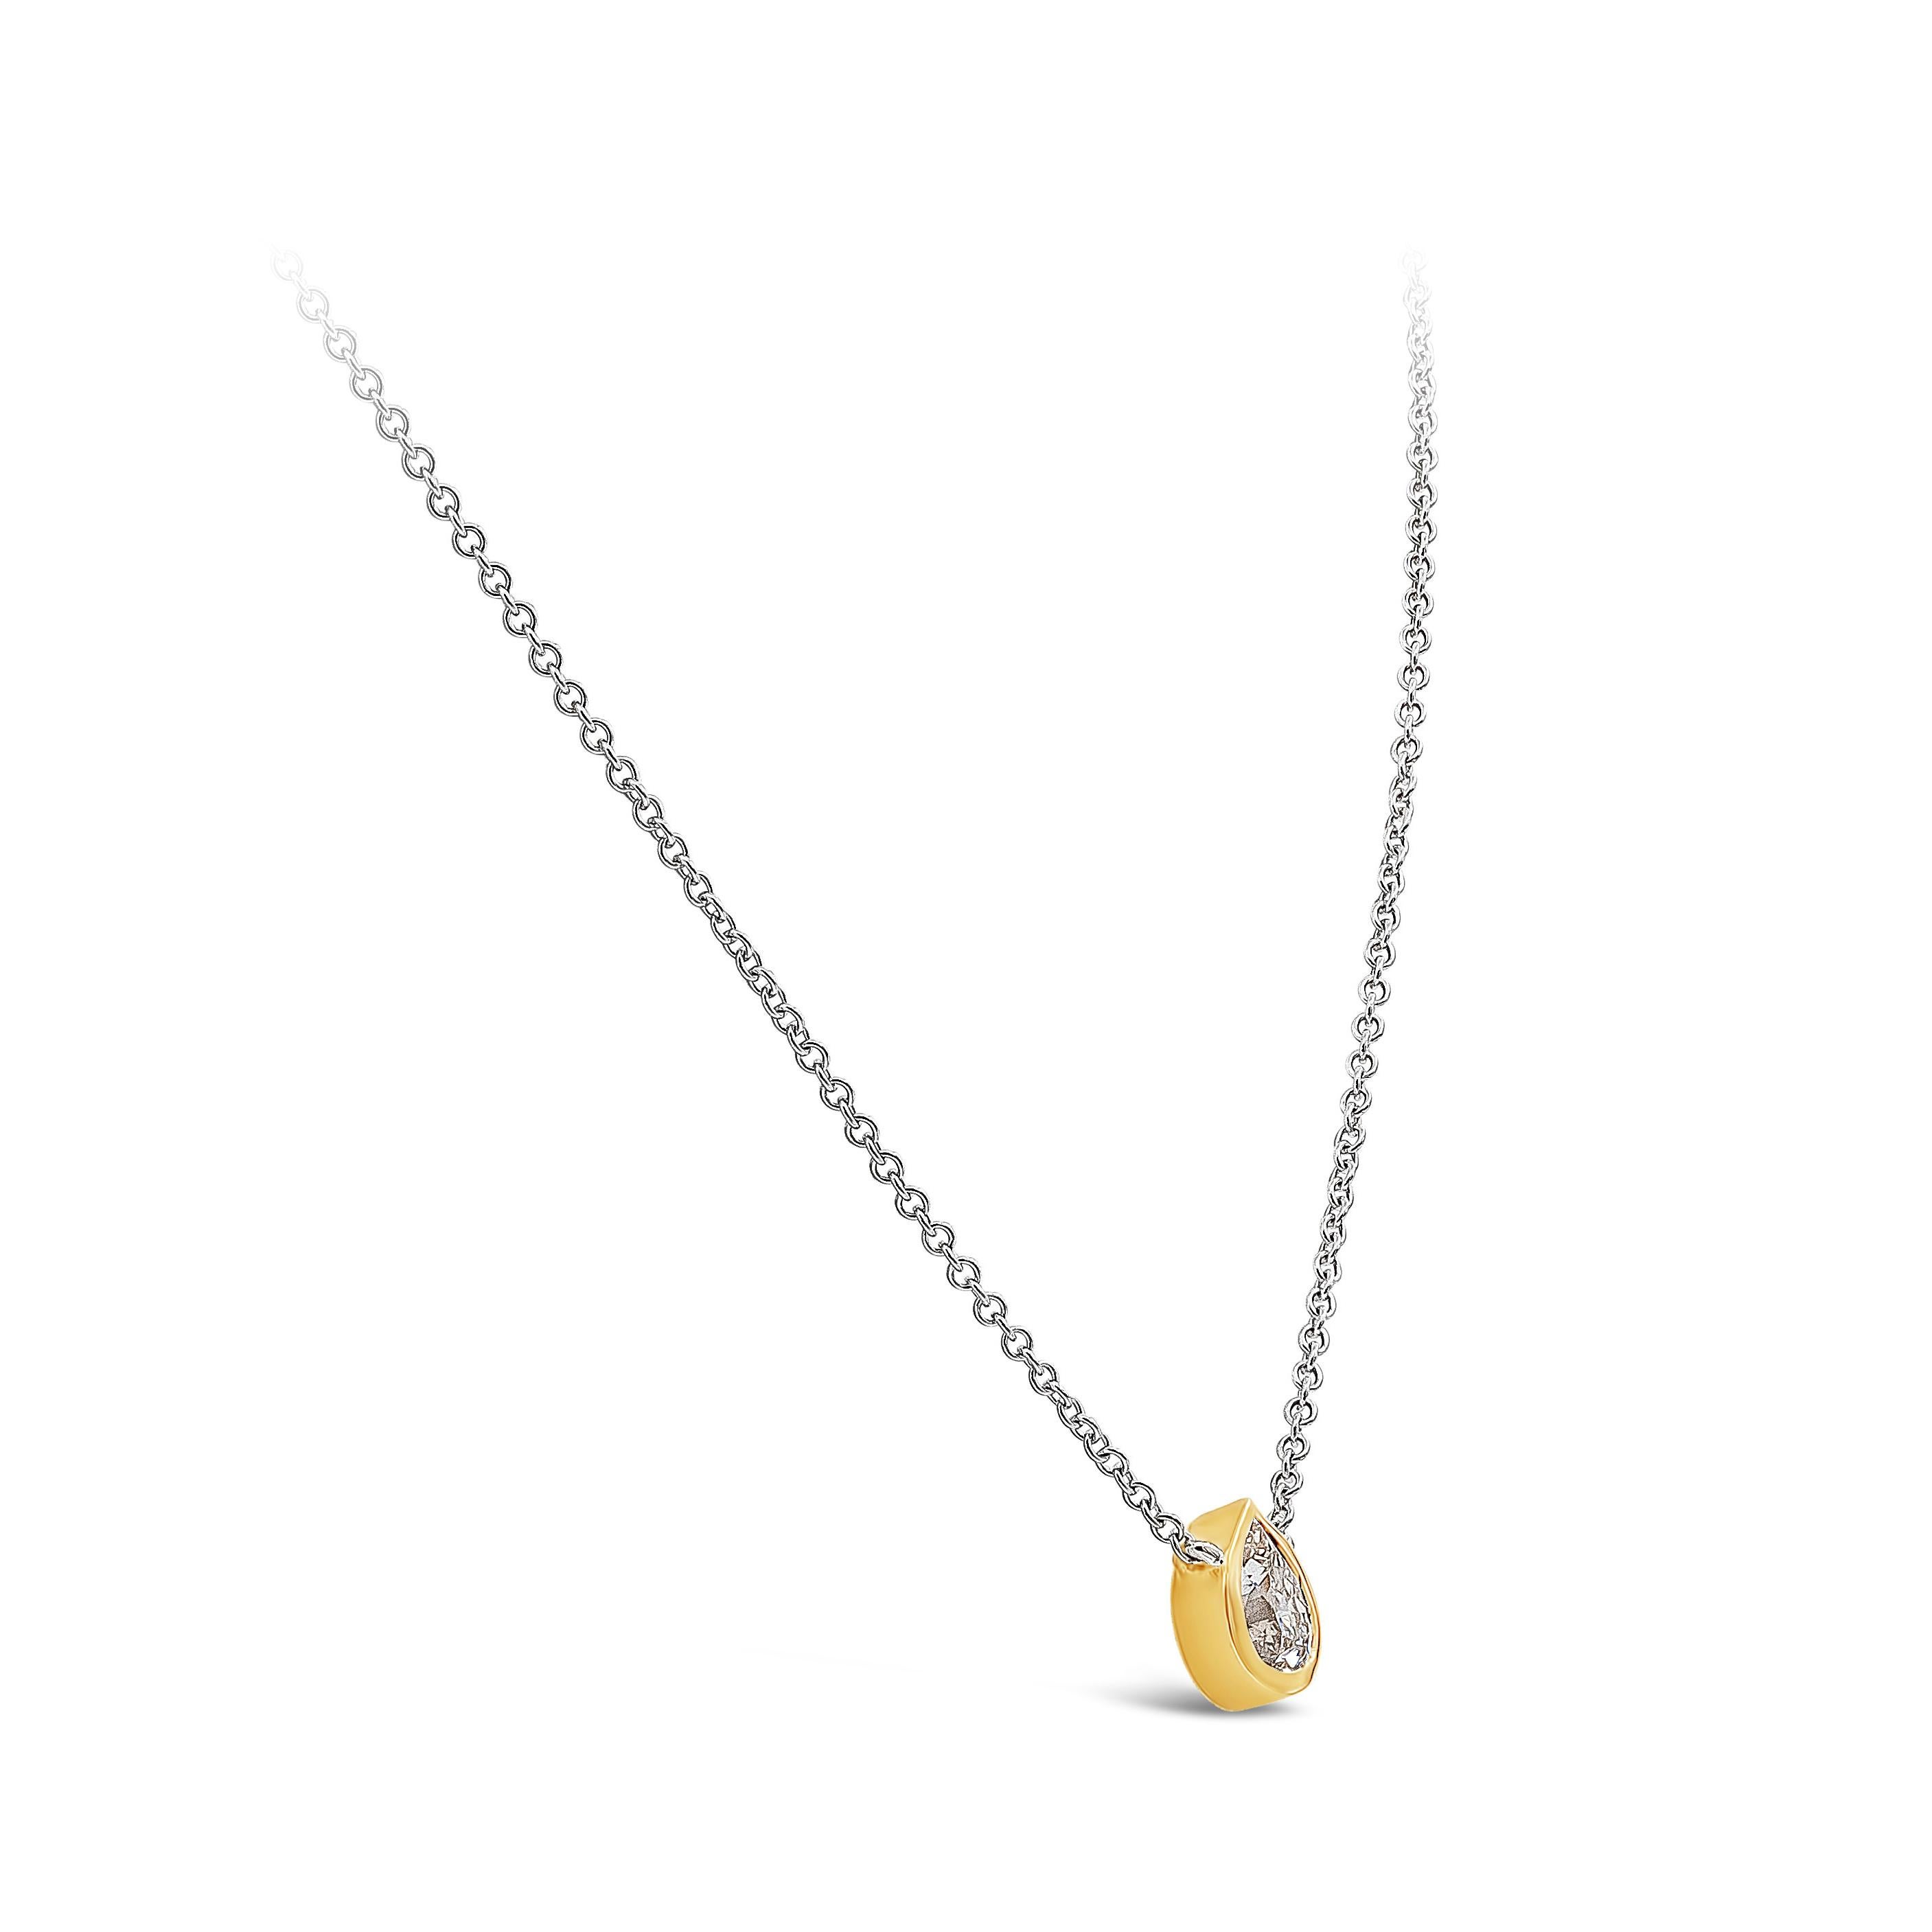 A simple pendant necklace showcasing a GIA Certified 0.92 carat pear shape diamond, L Color and SI2 in Clarity. Bezel set in 14K Yellow Gold, suspended on a 14K White Gold Chain. 16 inches in Length. 

Style available in different price ranges.